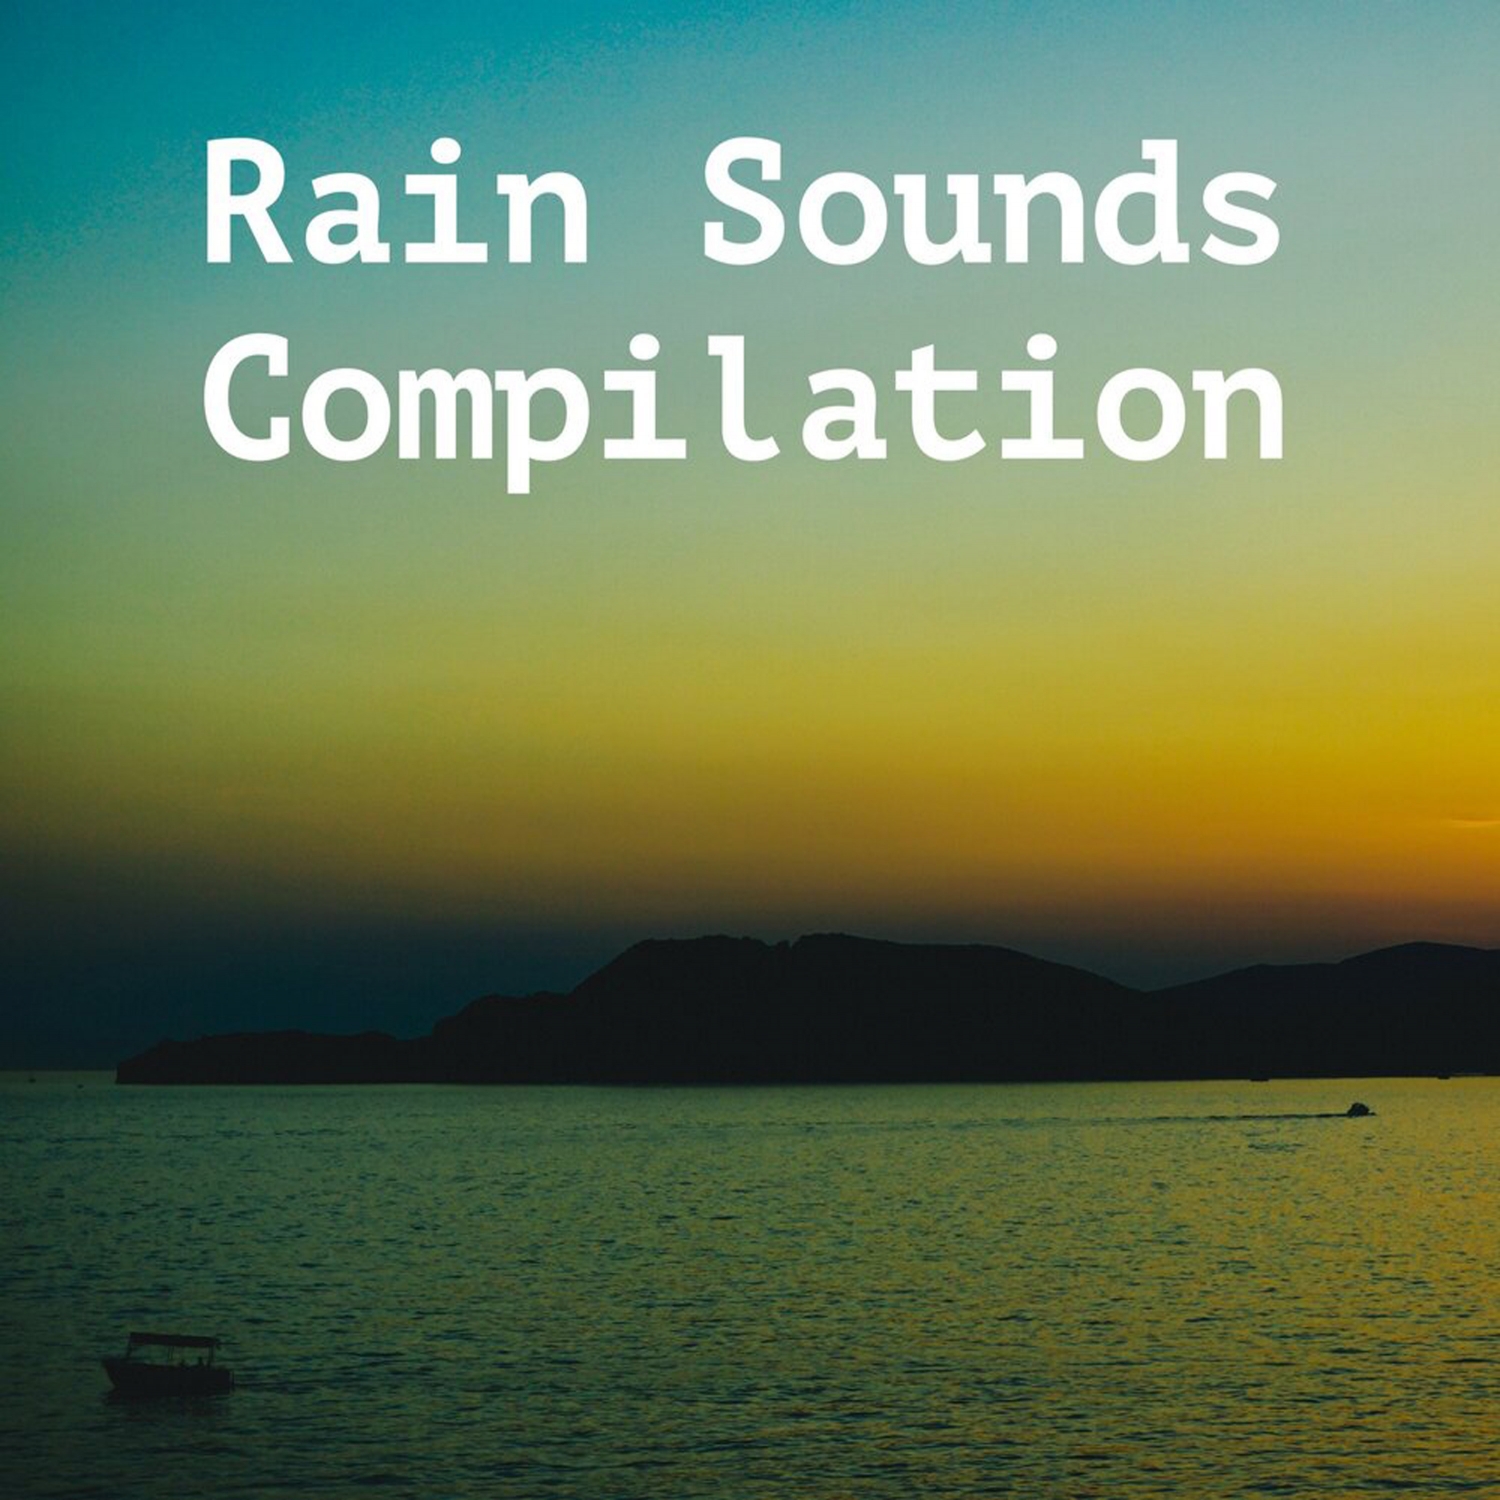 14 The Best Rain and Nature Sounds. Real Rain Sounds for Sleep and Meditation